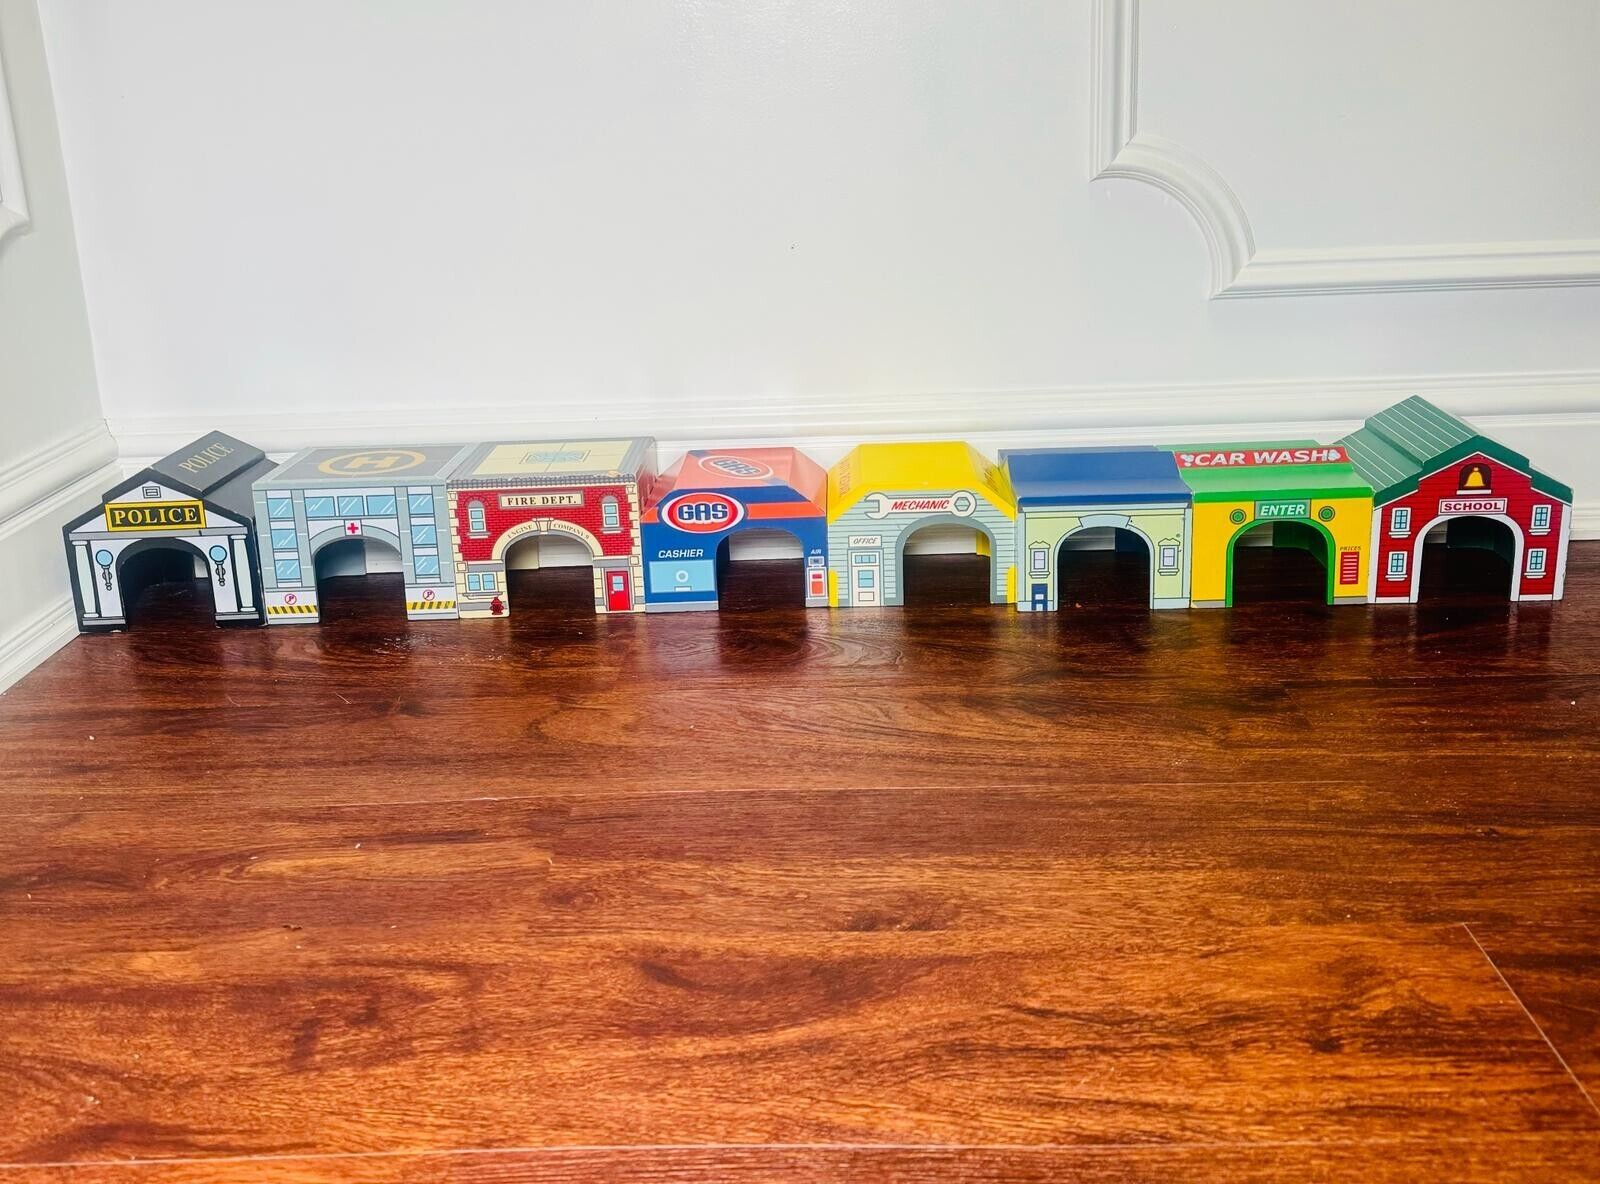 8 LAKESHORE Learning Wood Toy Block Party Buildings, Drive Through Wooden Town